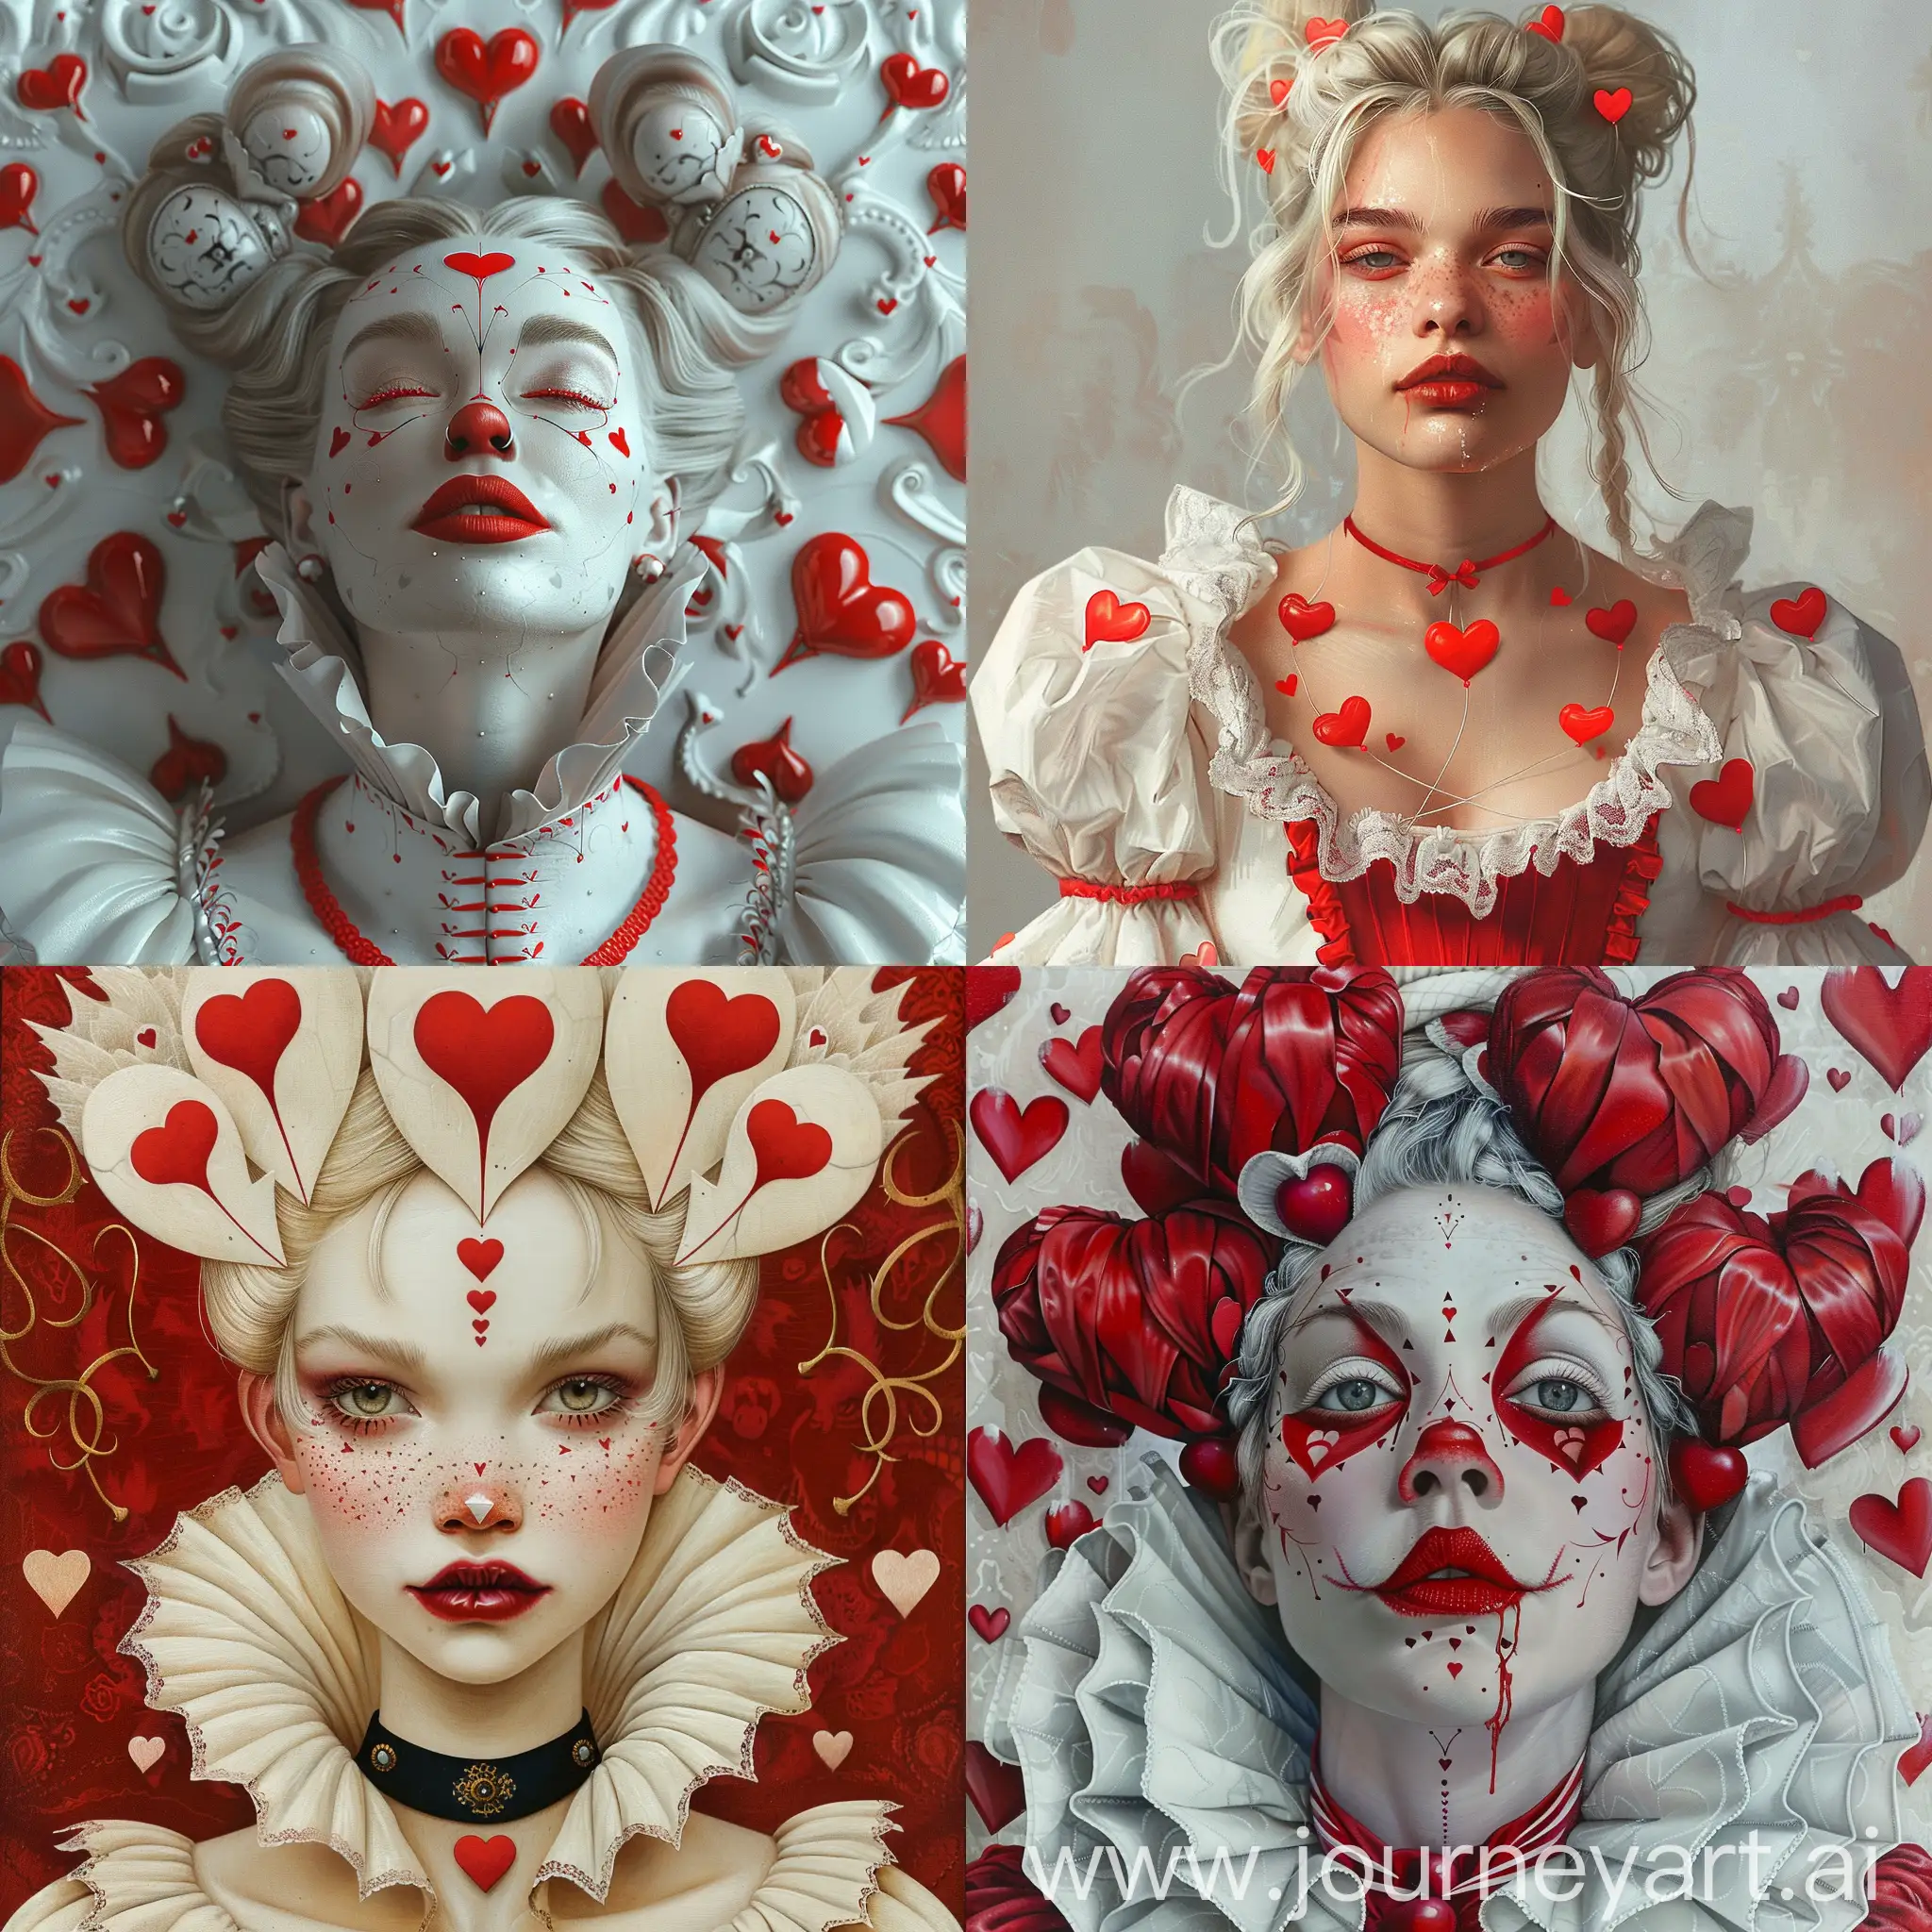 Flat-Queen-of-Hearts-on-Social-Media-Darkly-Romantic-Realism-in-Slovenian-Paintings